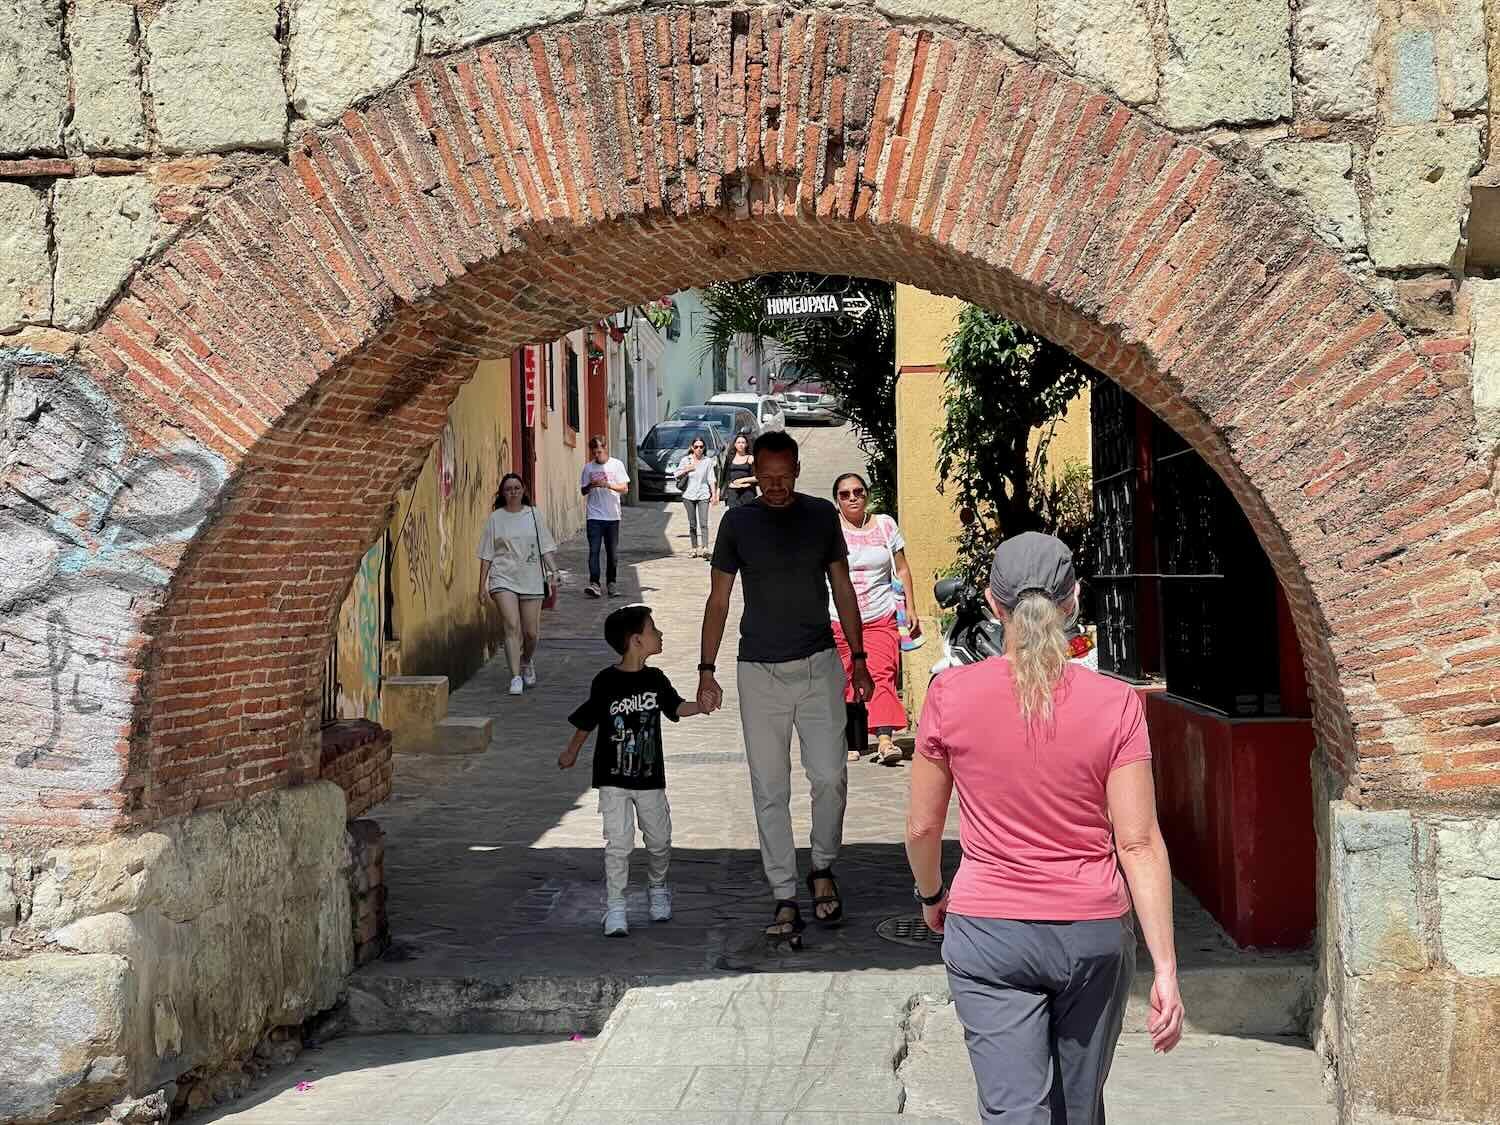 The arches of an aqueduct built in the mid-1700s now provide picturesque walkways